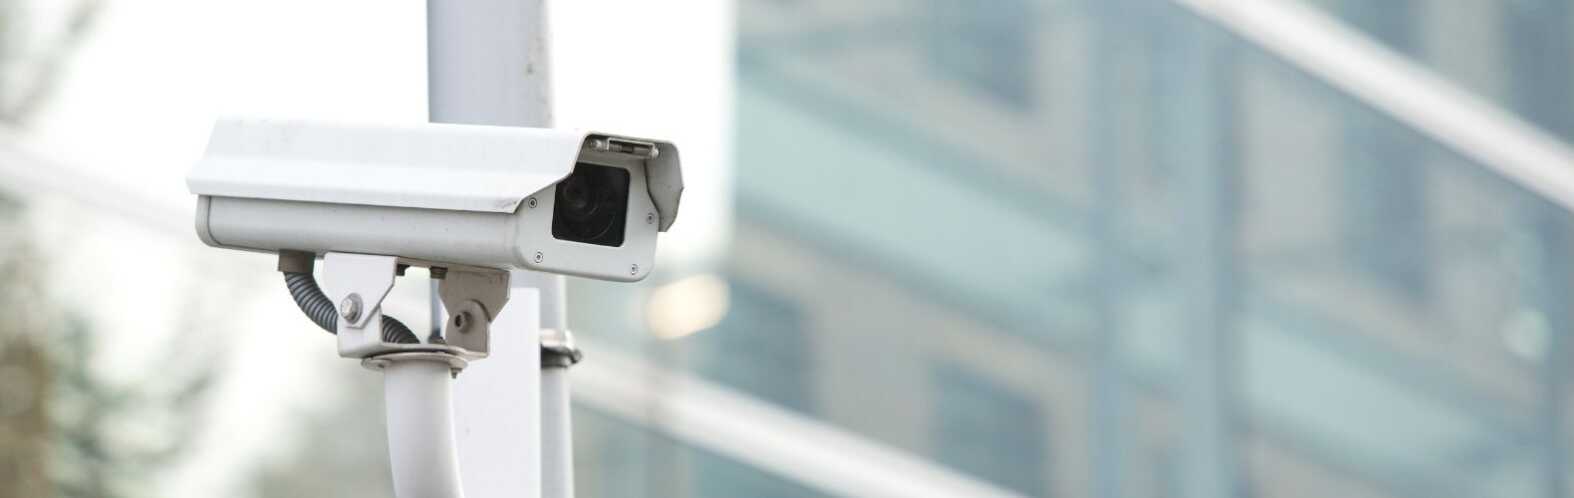 security camera mistakes businesses make